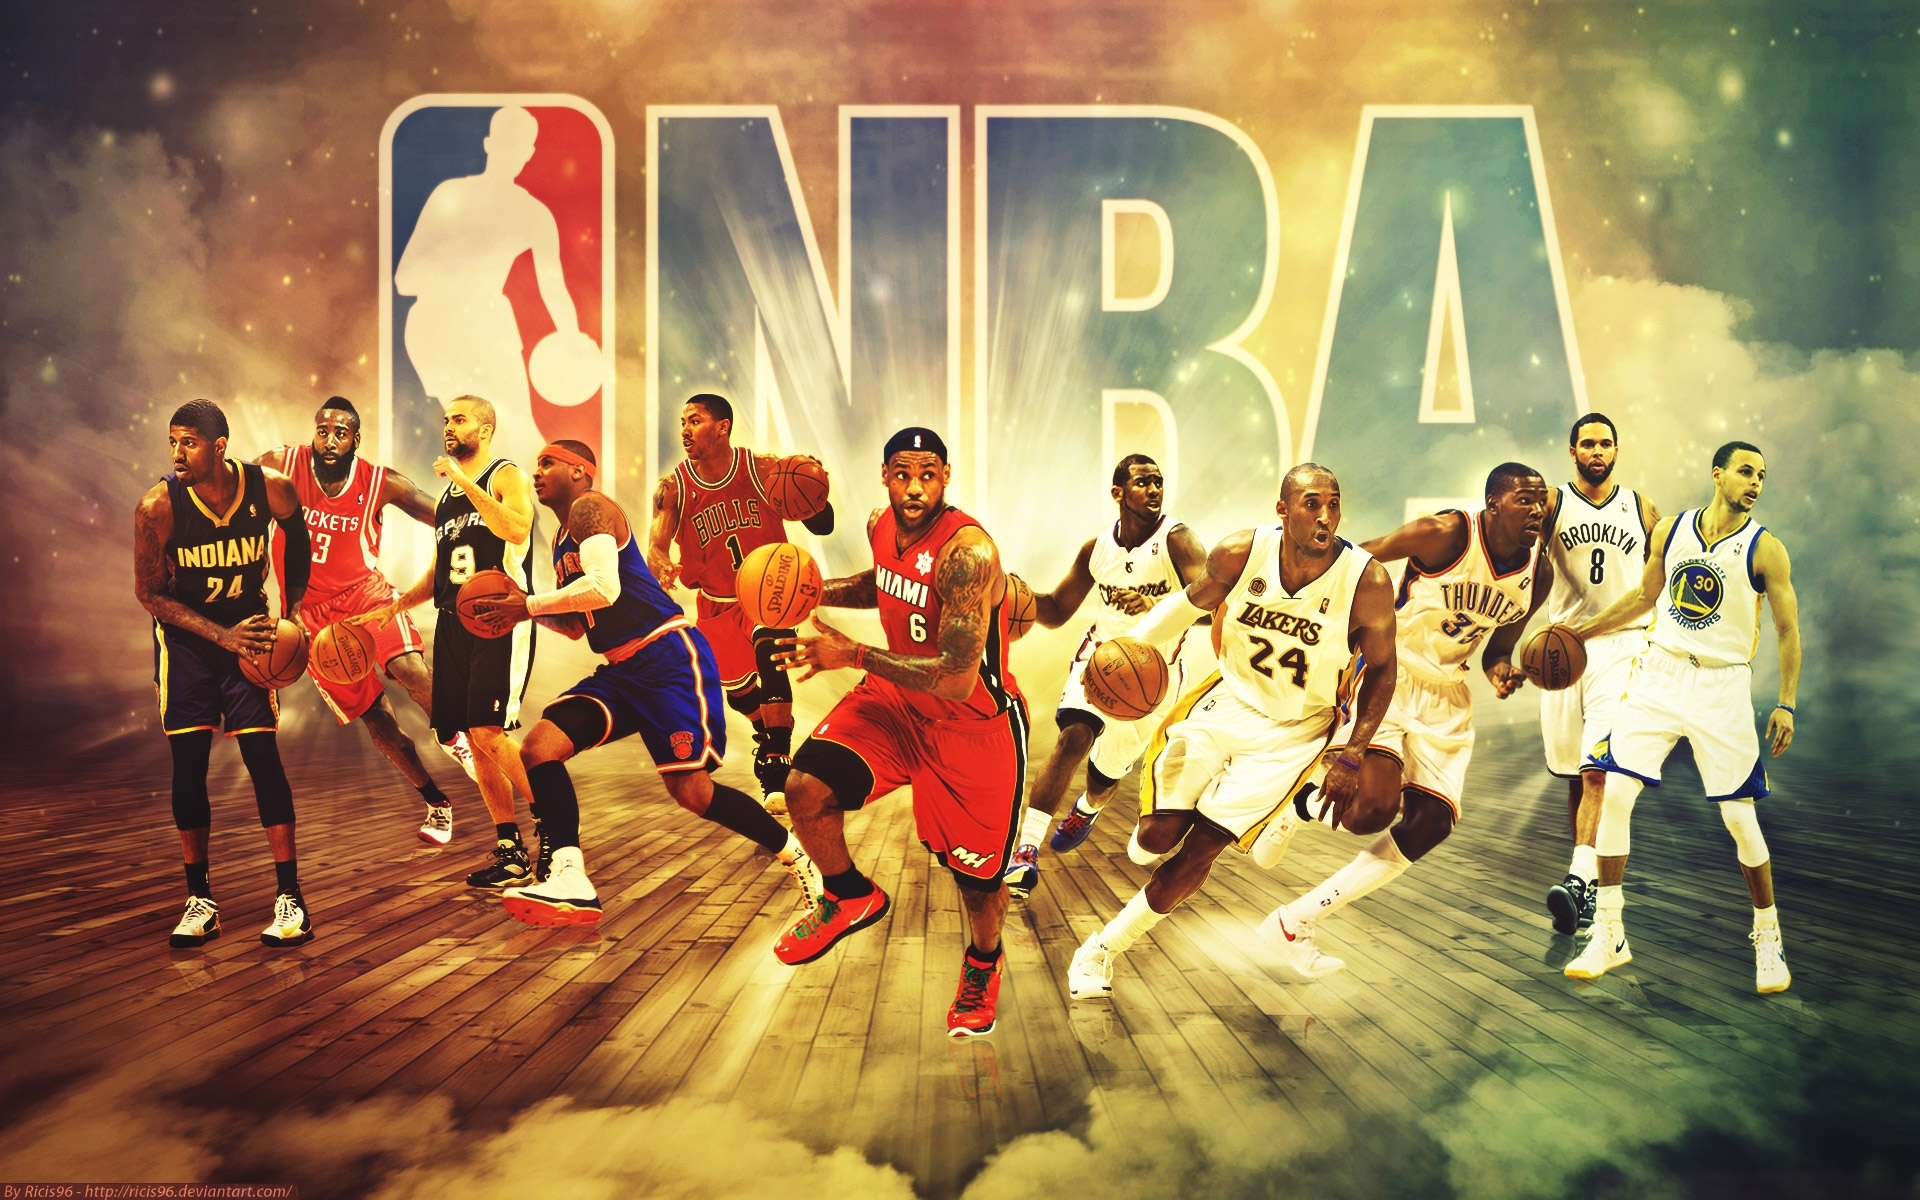 10 Top Wallpapers Of Basketball Players FULL HD 1080p For PC Desktop